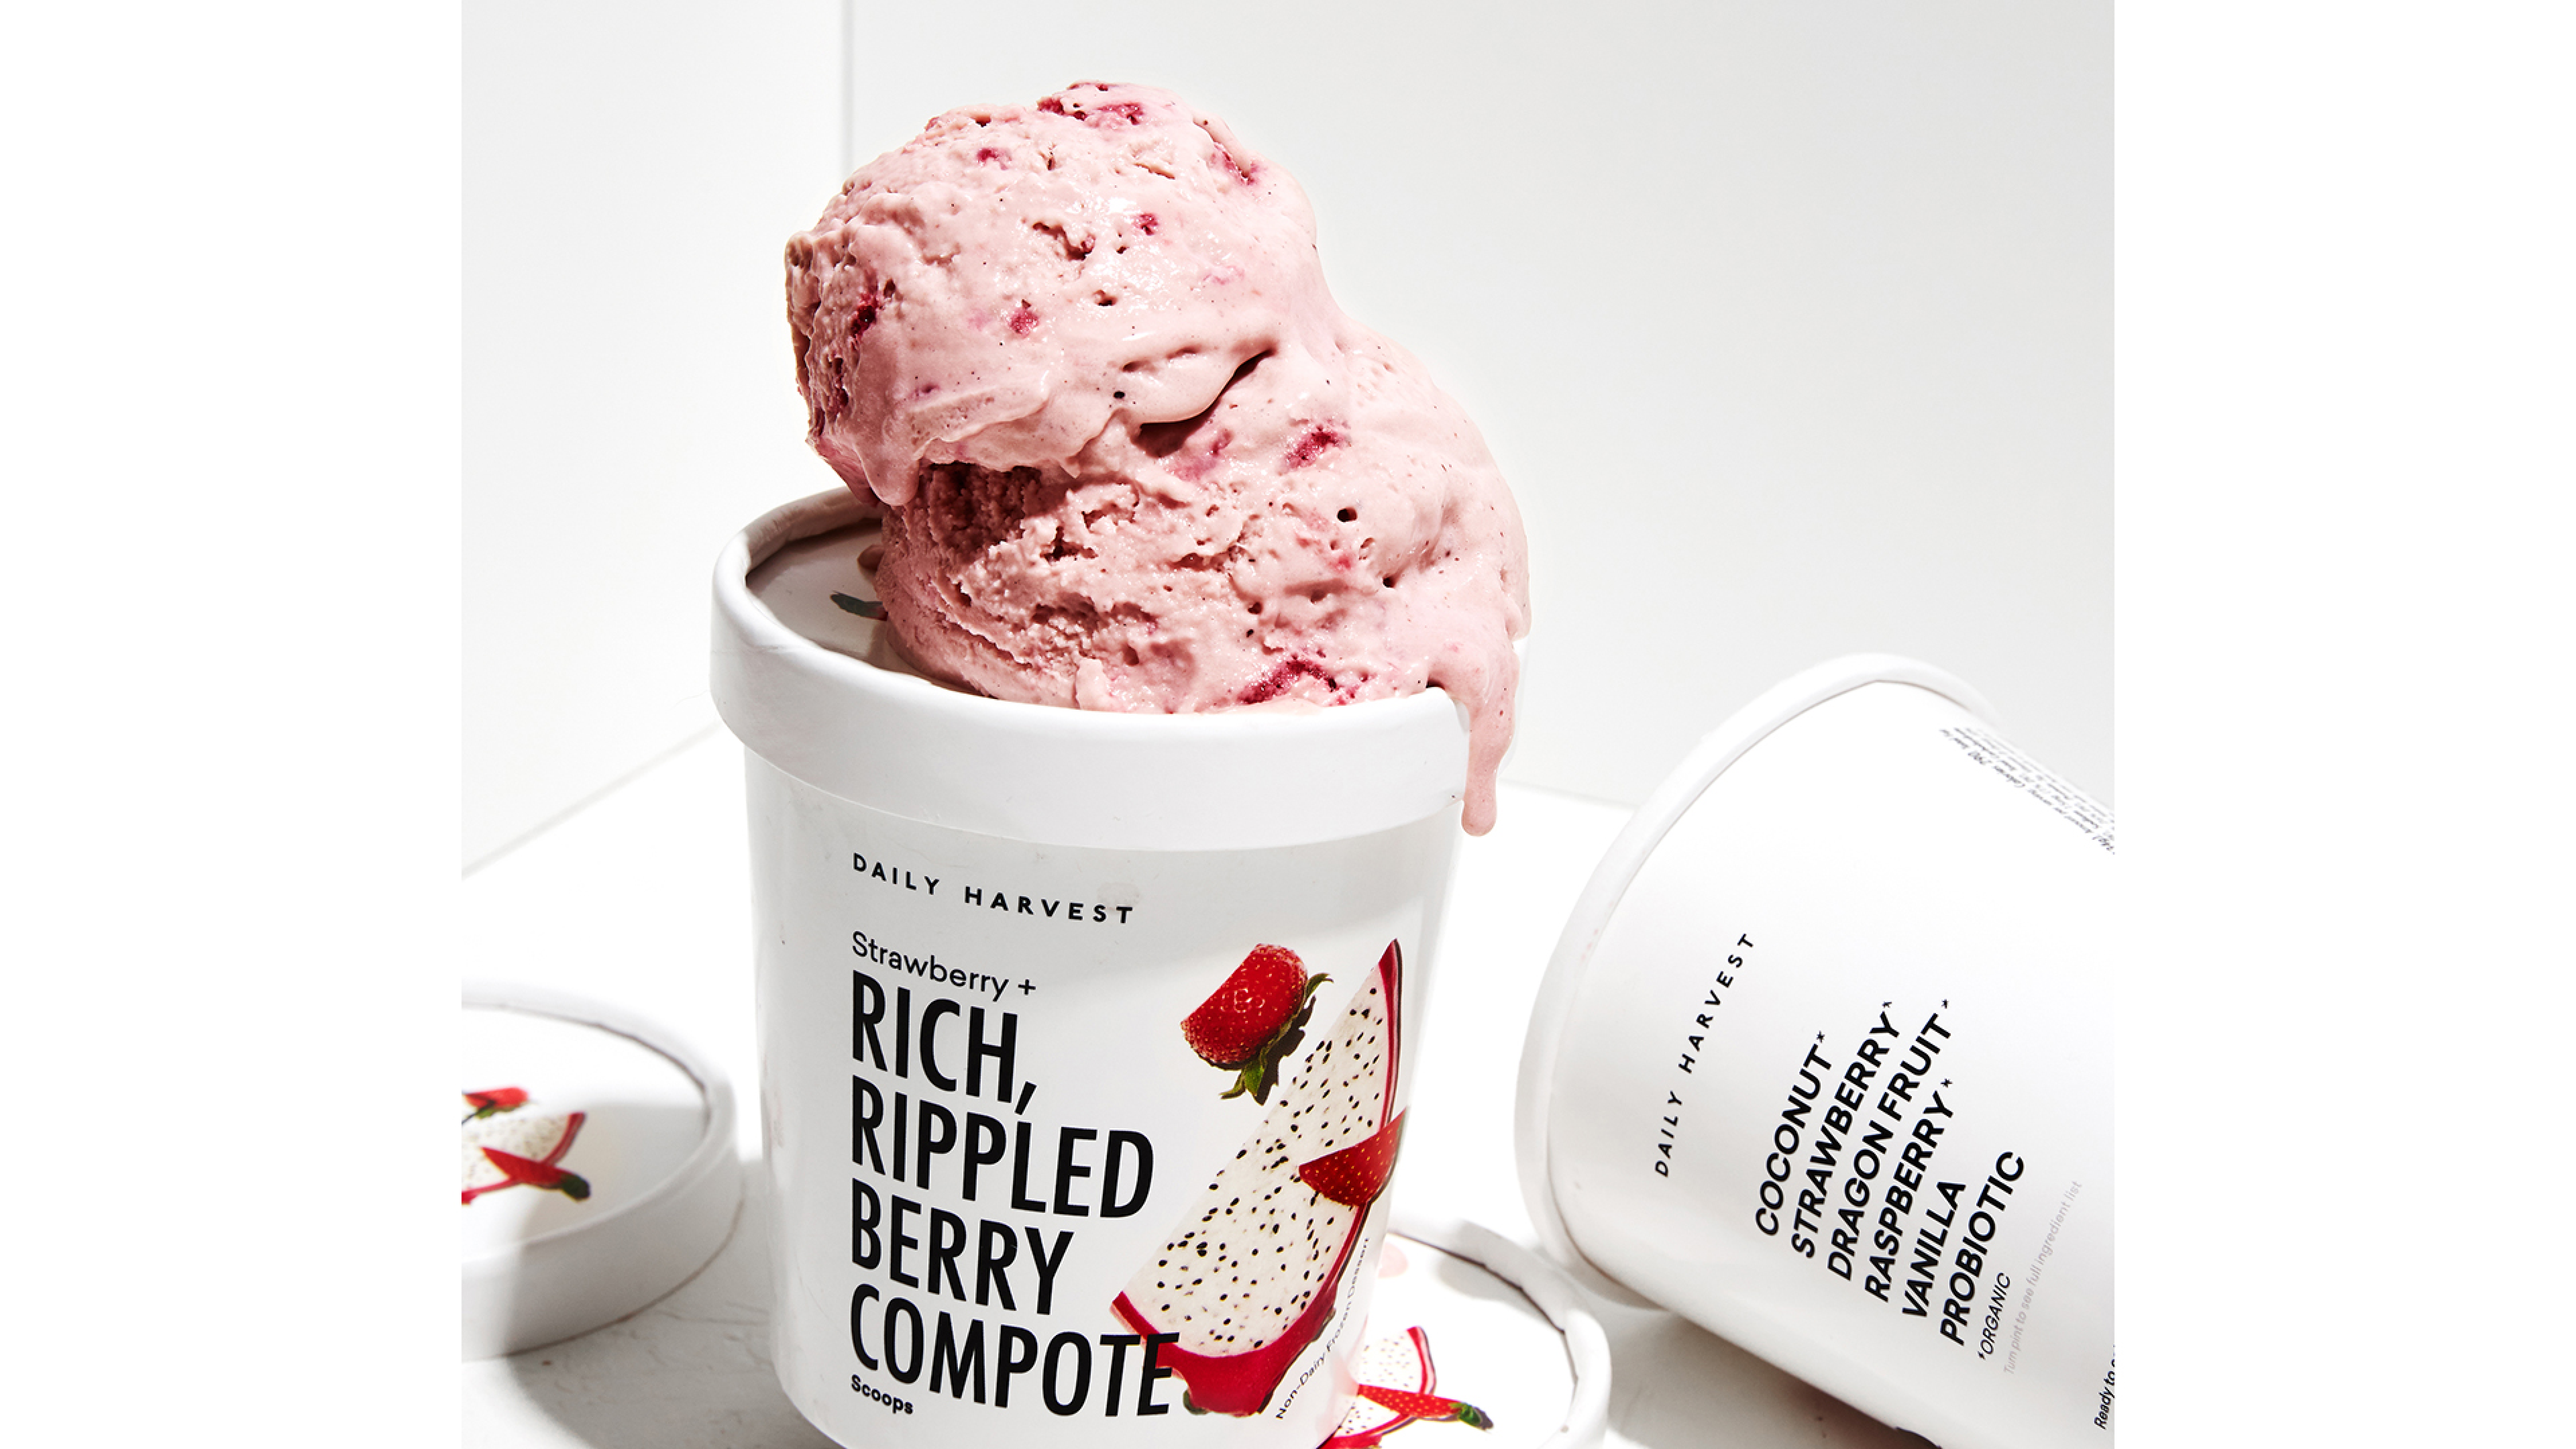 Daily Harvest Strawberry + Rich, Rippled Berry Compote Vegan Ice Cream